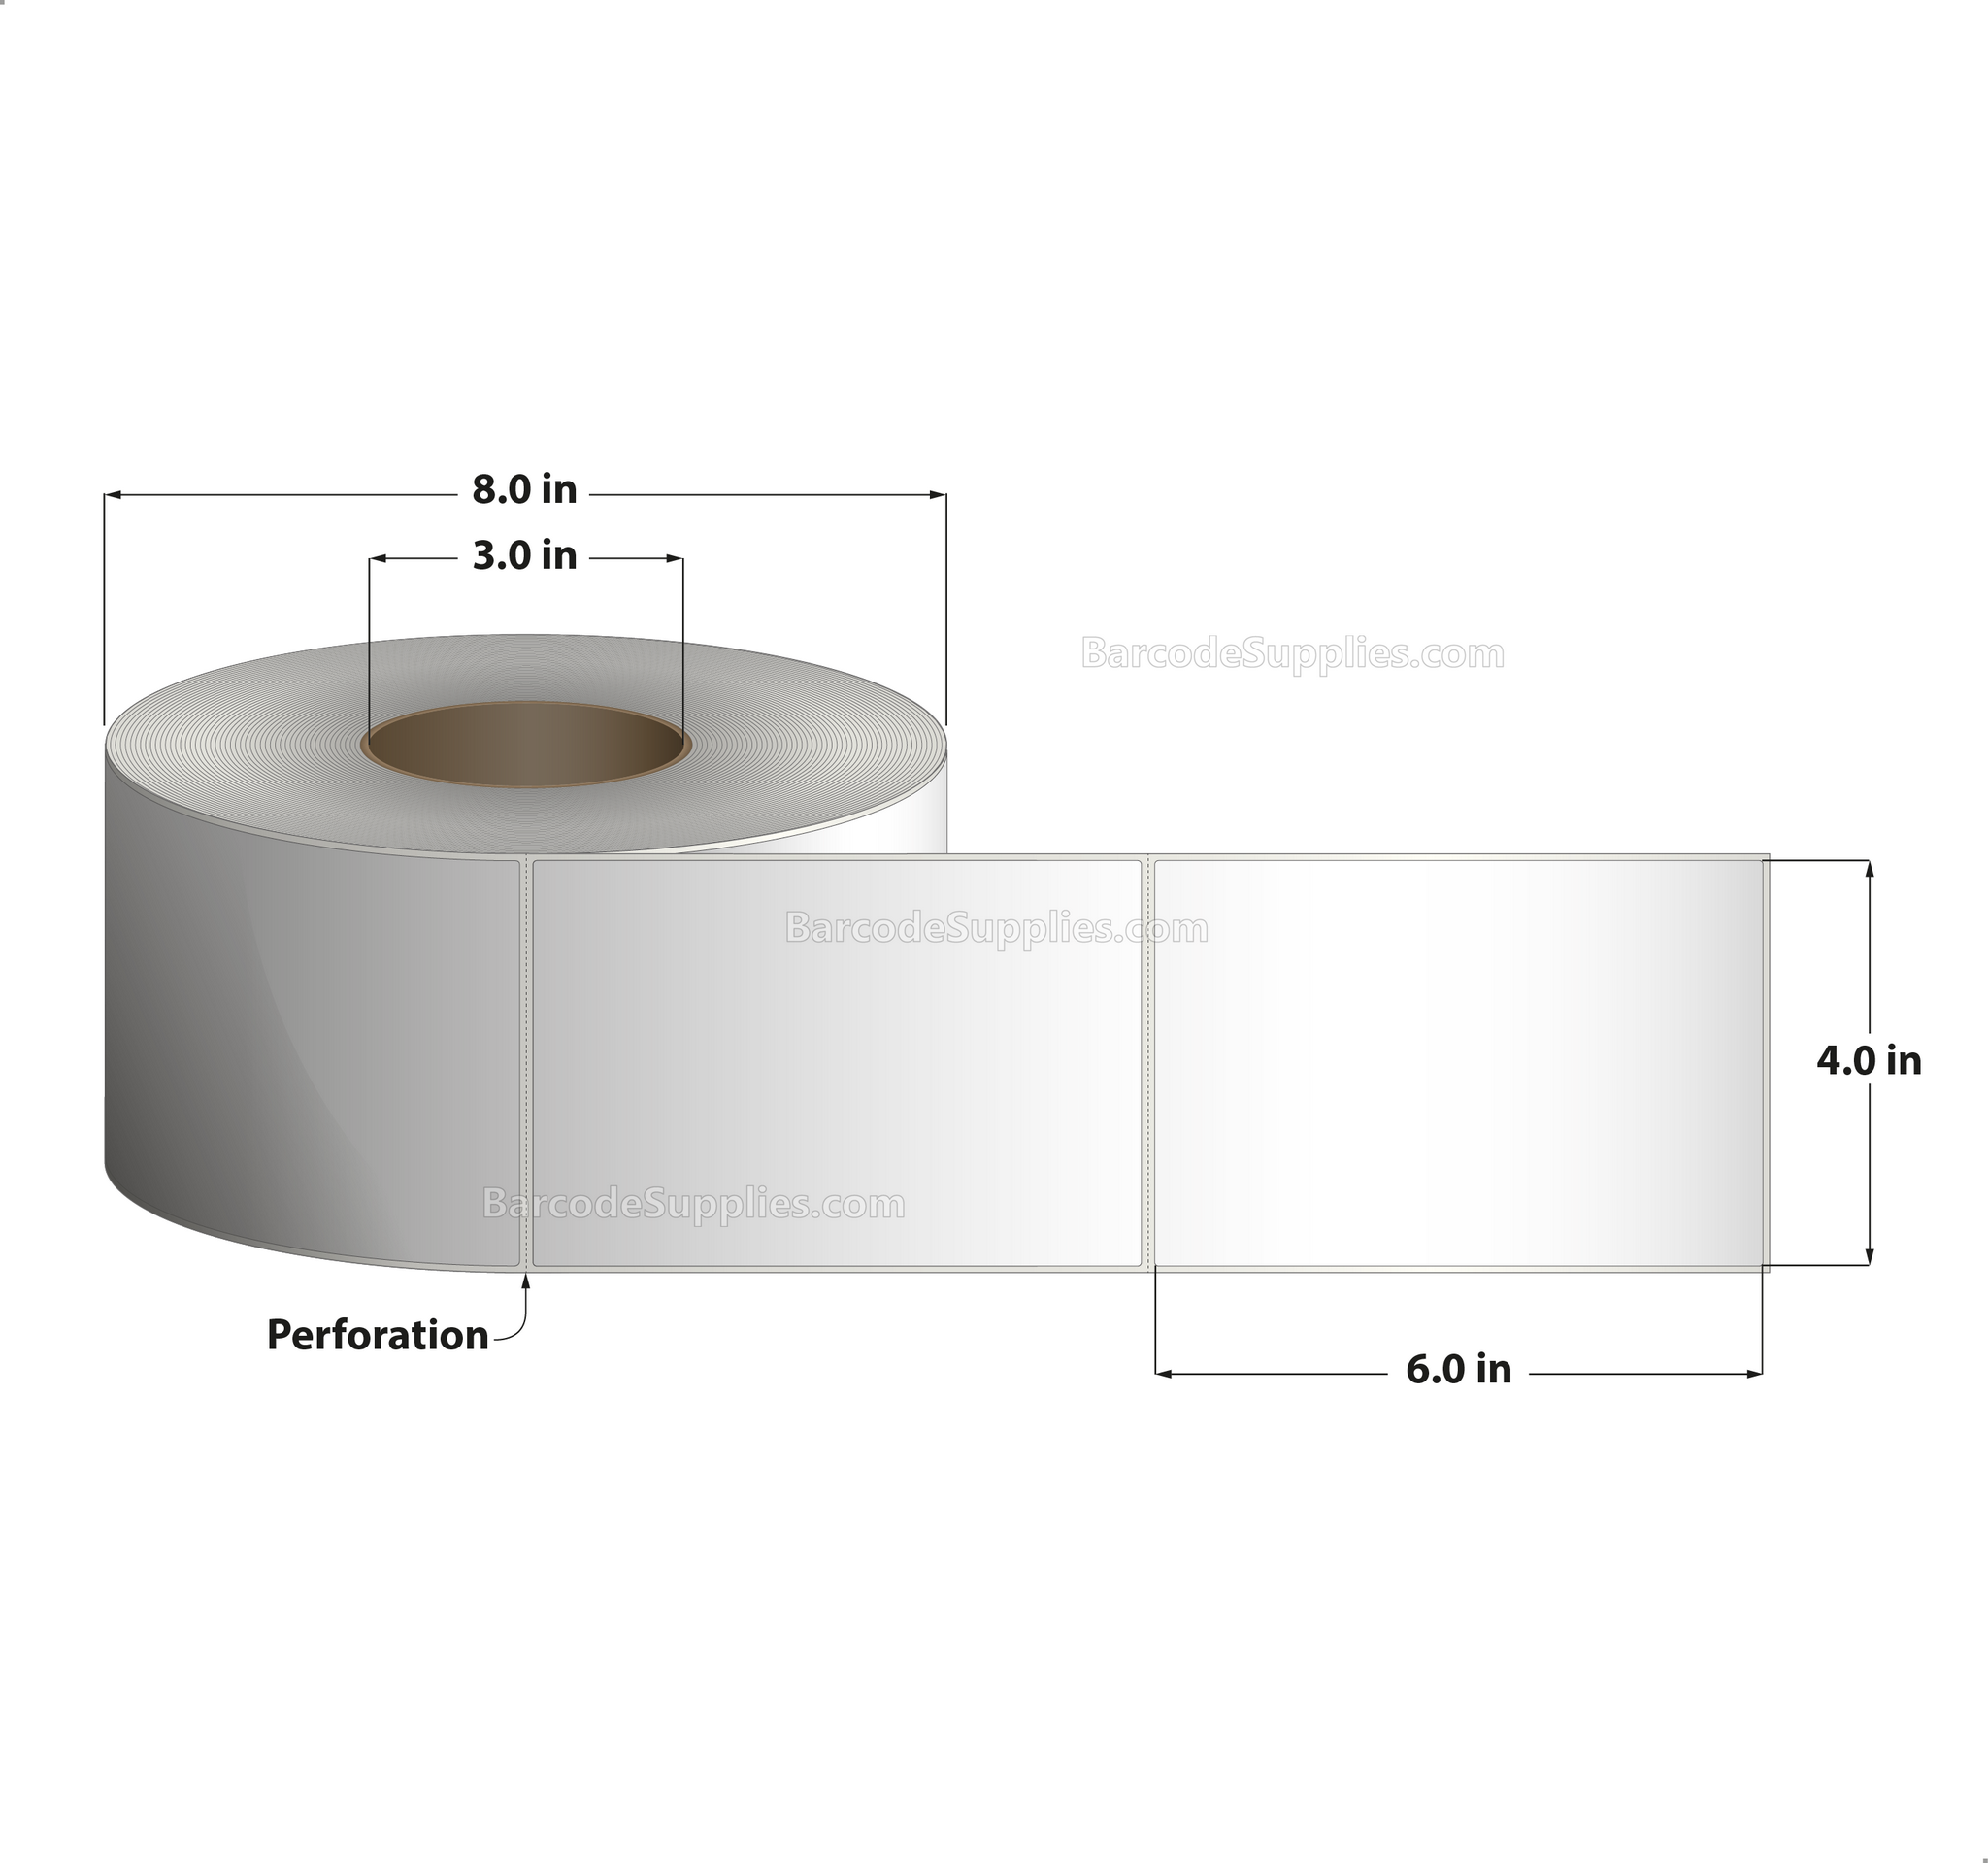 4 x 6 Direct Thermal White Labels With Rubber Adhesive - Perforated - 1000 Labels Per Roll - Carton Of 4 Rolls - 4000 Labels Total - MPN: DT400600-3P